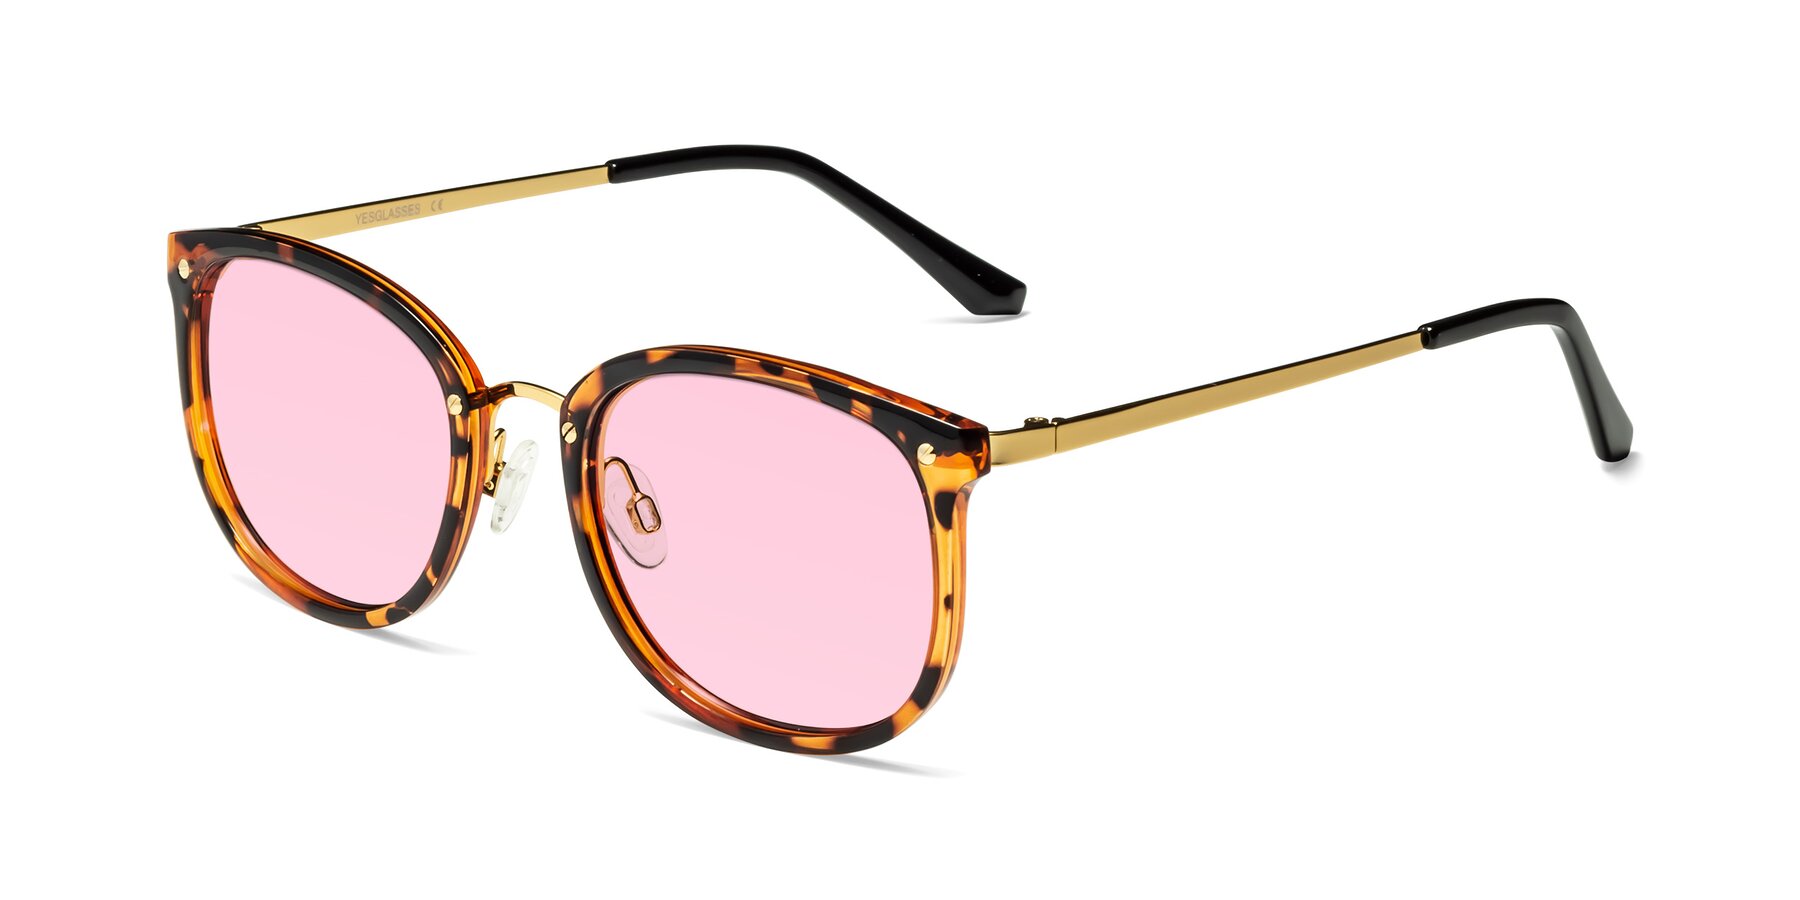 Angle of Timeless in Tortoise-Golden with Light Pink Tinted Lenses